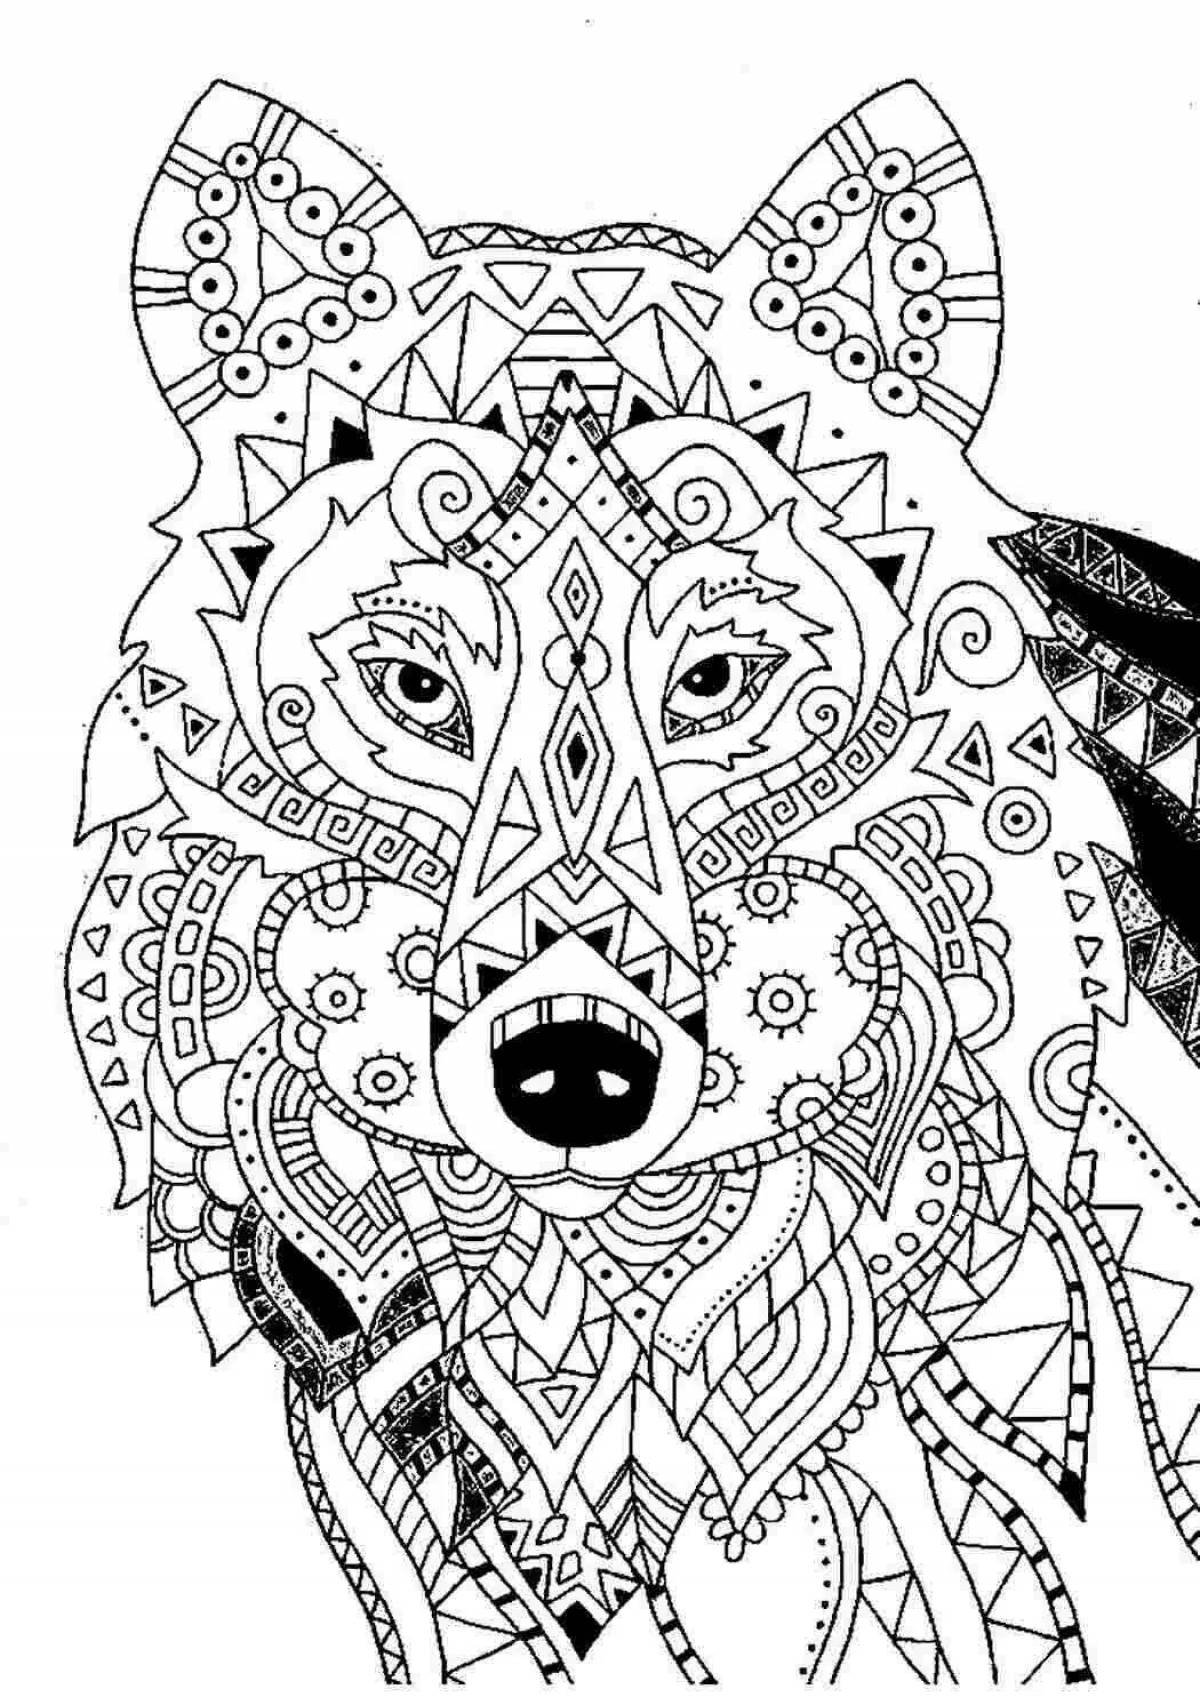 Blissful 15 year anti-stress coloring book